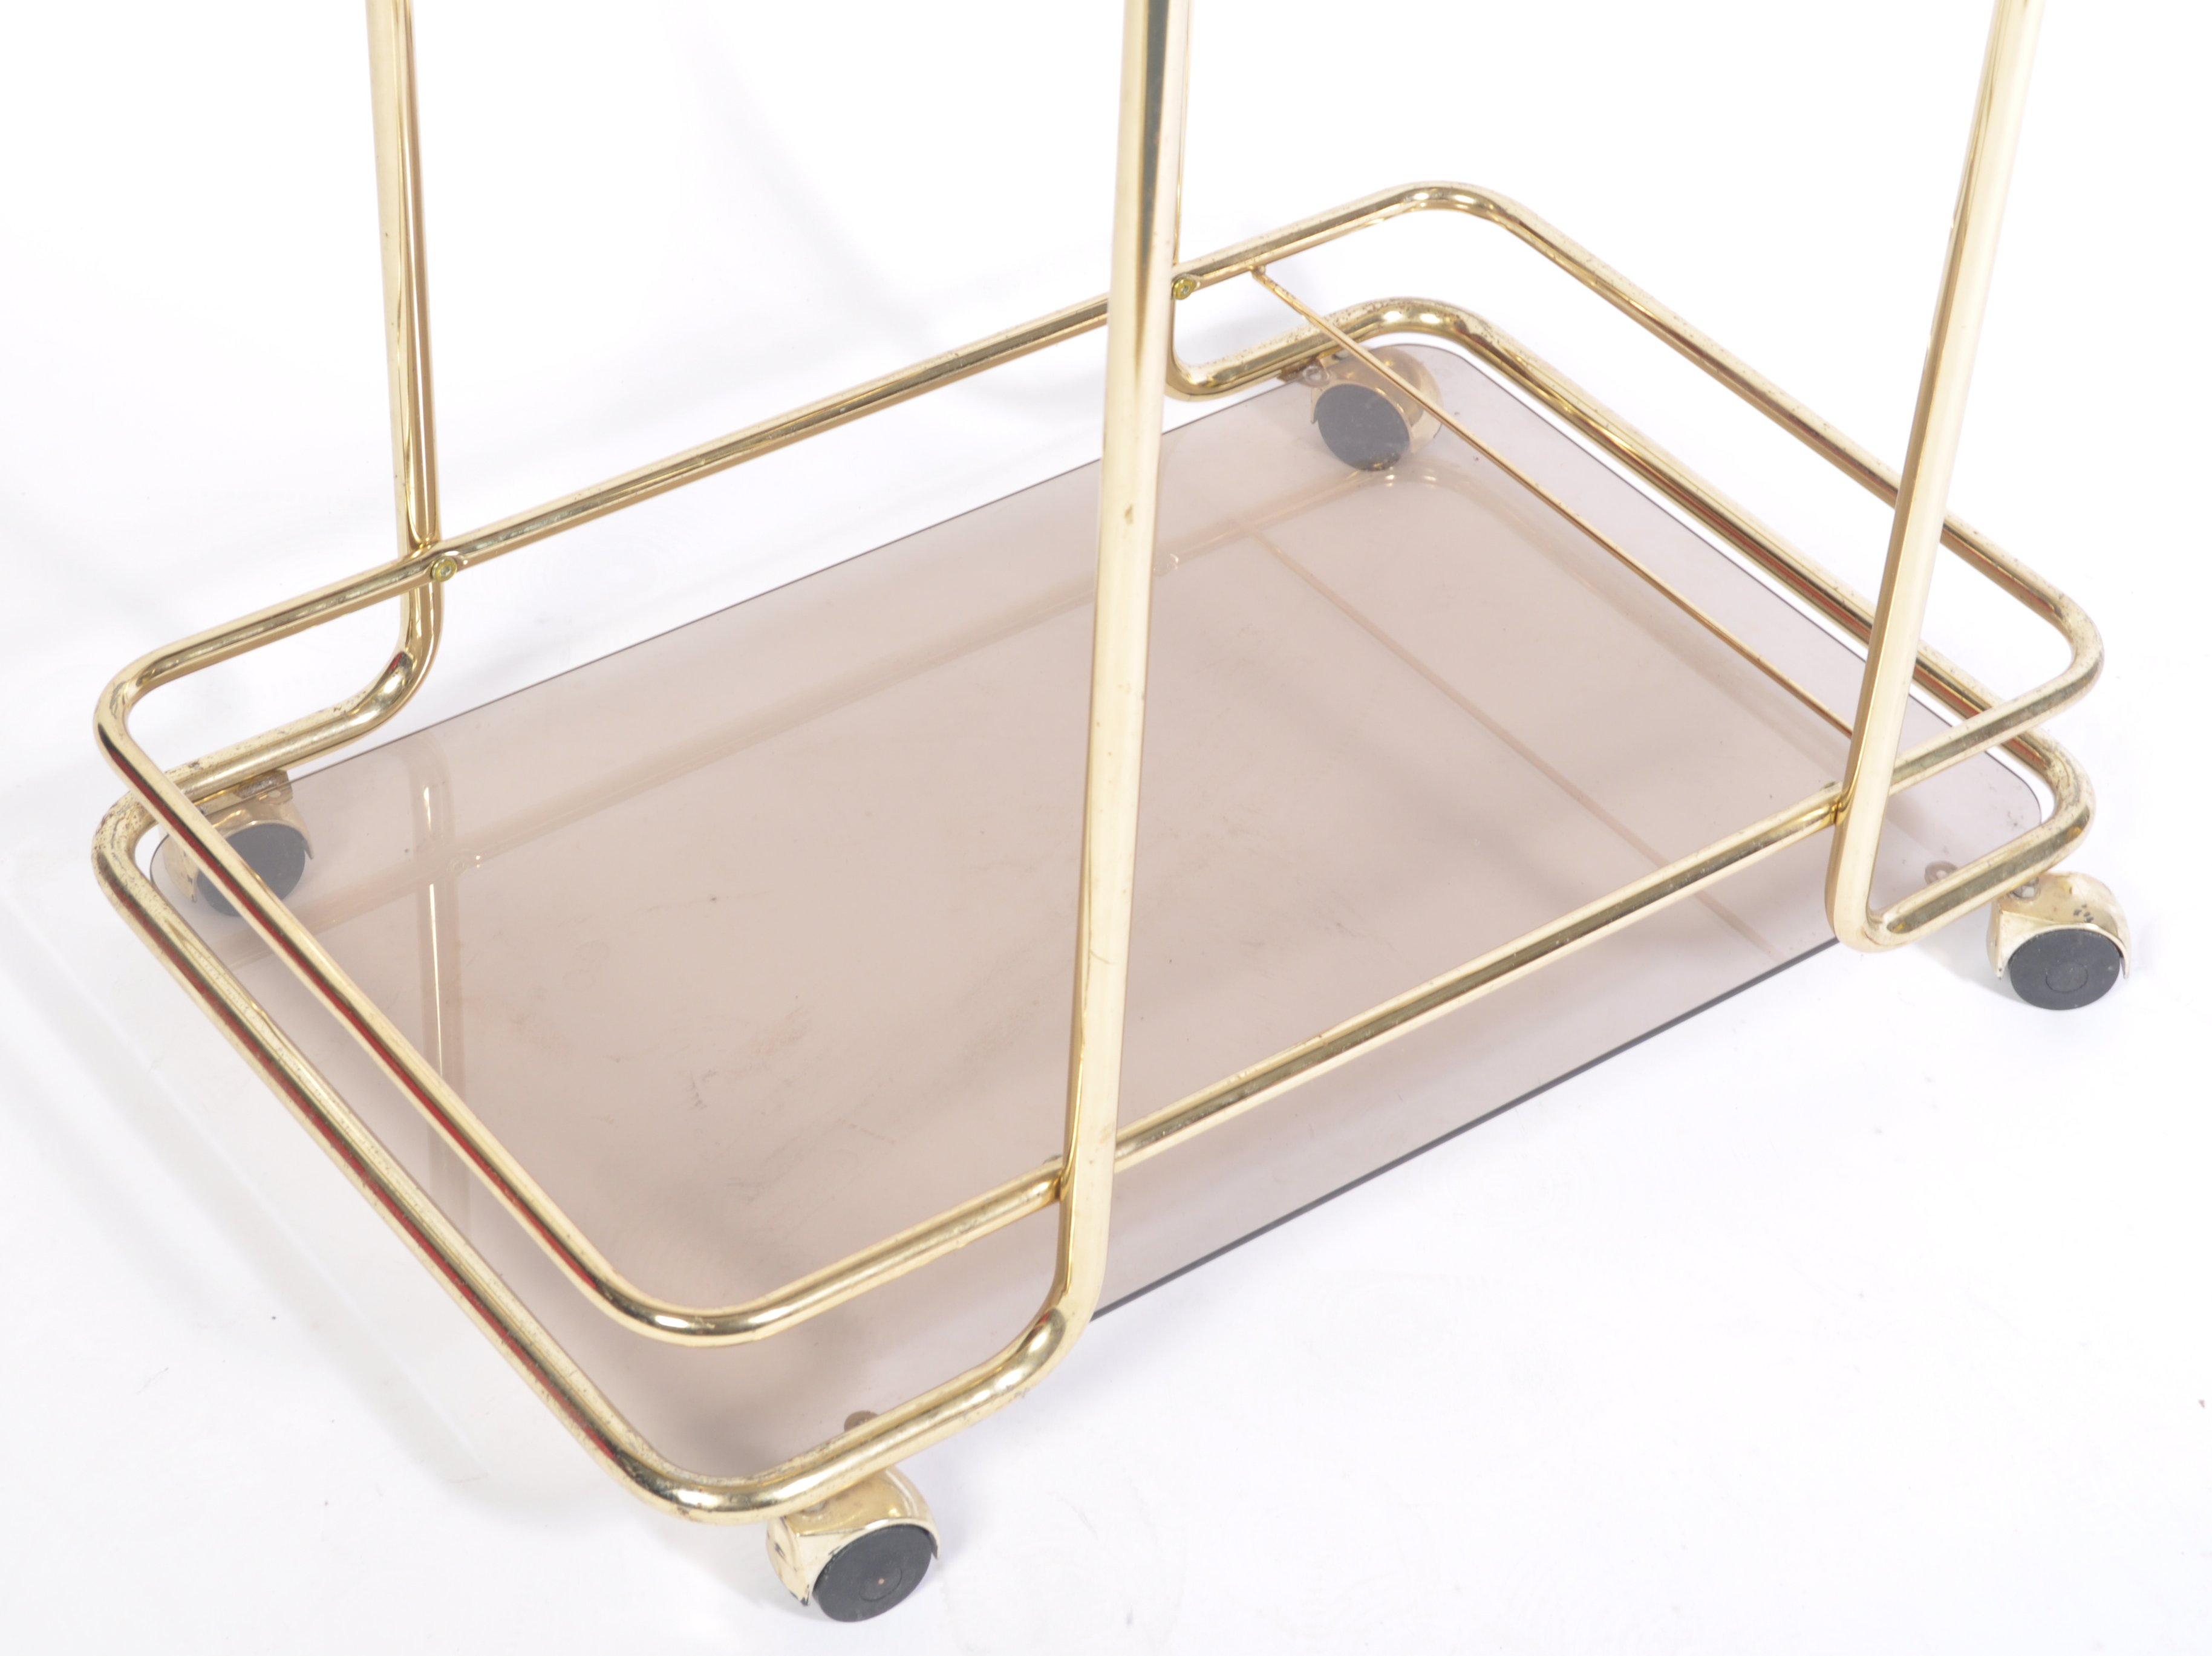 ITALIAN 1970'S BRASS AND GLASS BAR CART DRINKS / COCKTAIL TROLLEY - Image 4 of 4